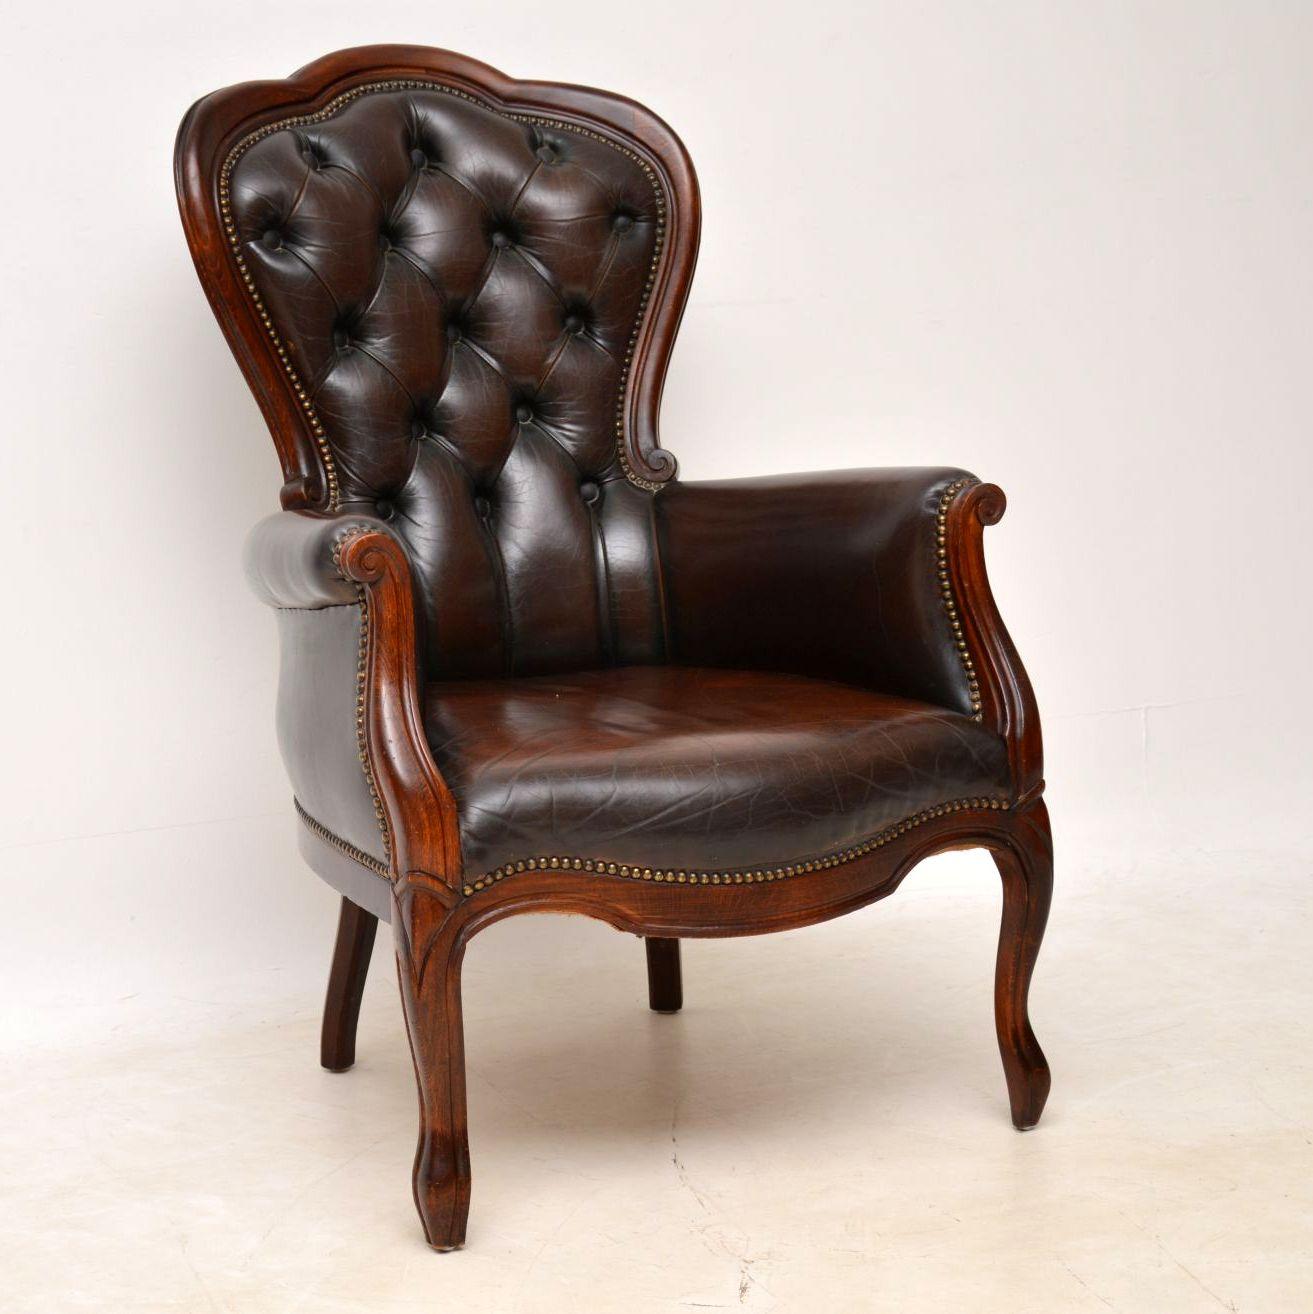 Antique Victorian style armchair with the original leather upholstery hand tacked onto a mahogany frame. It’s all in good condition and the leather is naturally aged, showing plenty of character. I would date this armchair, circa 1950s period. This